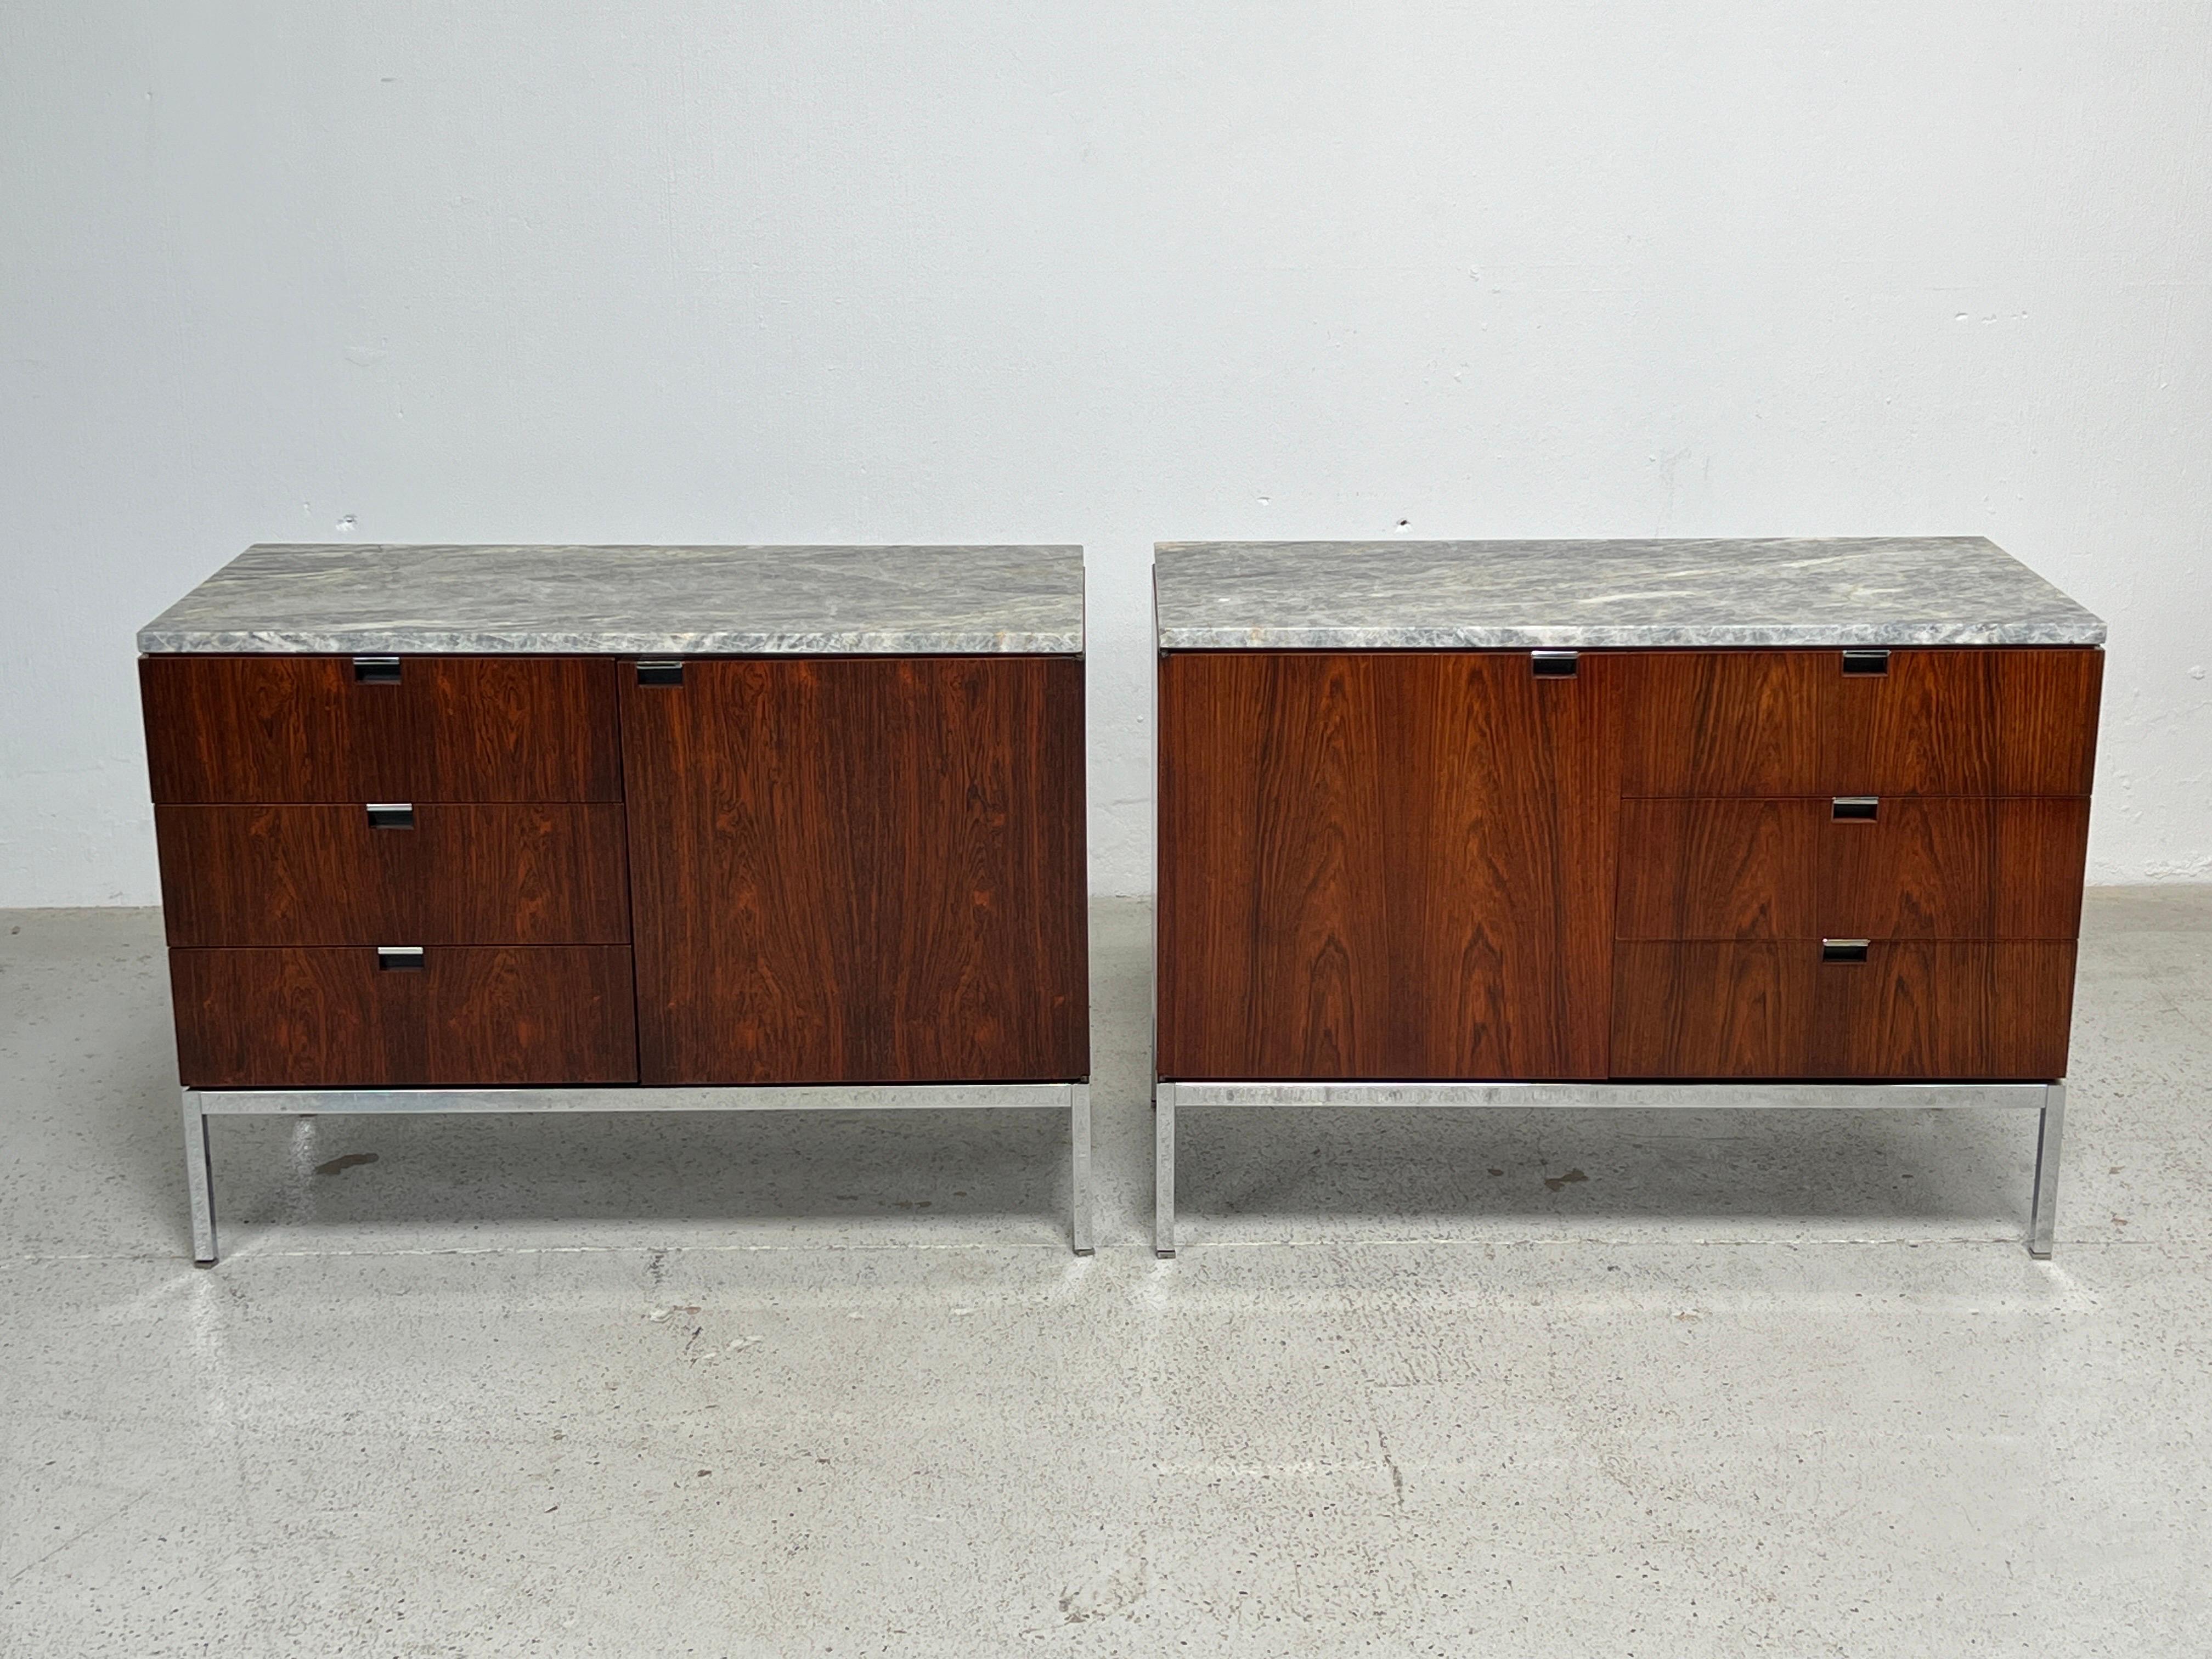  A pair of rosewood credenzas / nightstands with finished backs and marble tops. Designed by Florence Knoll for Knoll. 